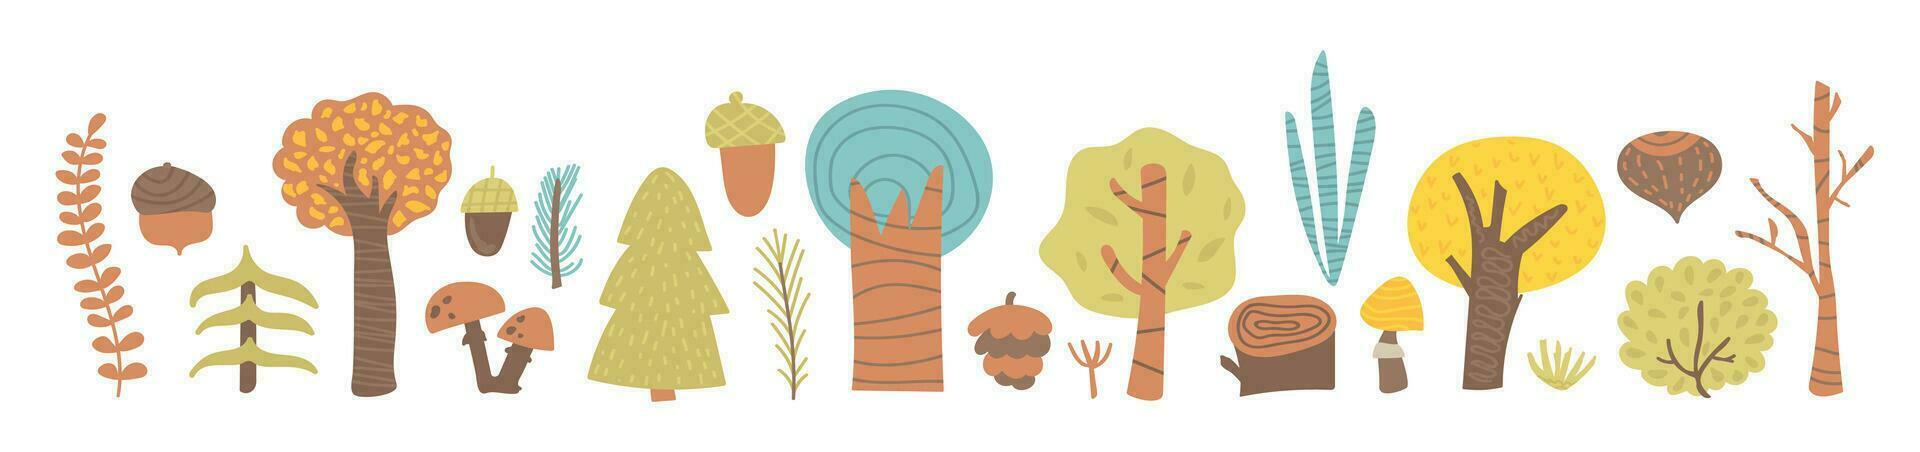 Collection of trees, bushes, mushrooms and acorn. Decorated plants of the forest, park, garden, grove. Clip art hand drawn botanical elements, nature. Vector illustration in flat style, seasons banner